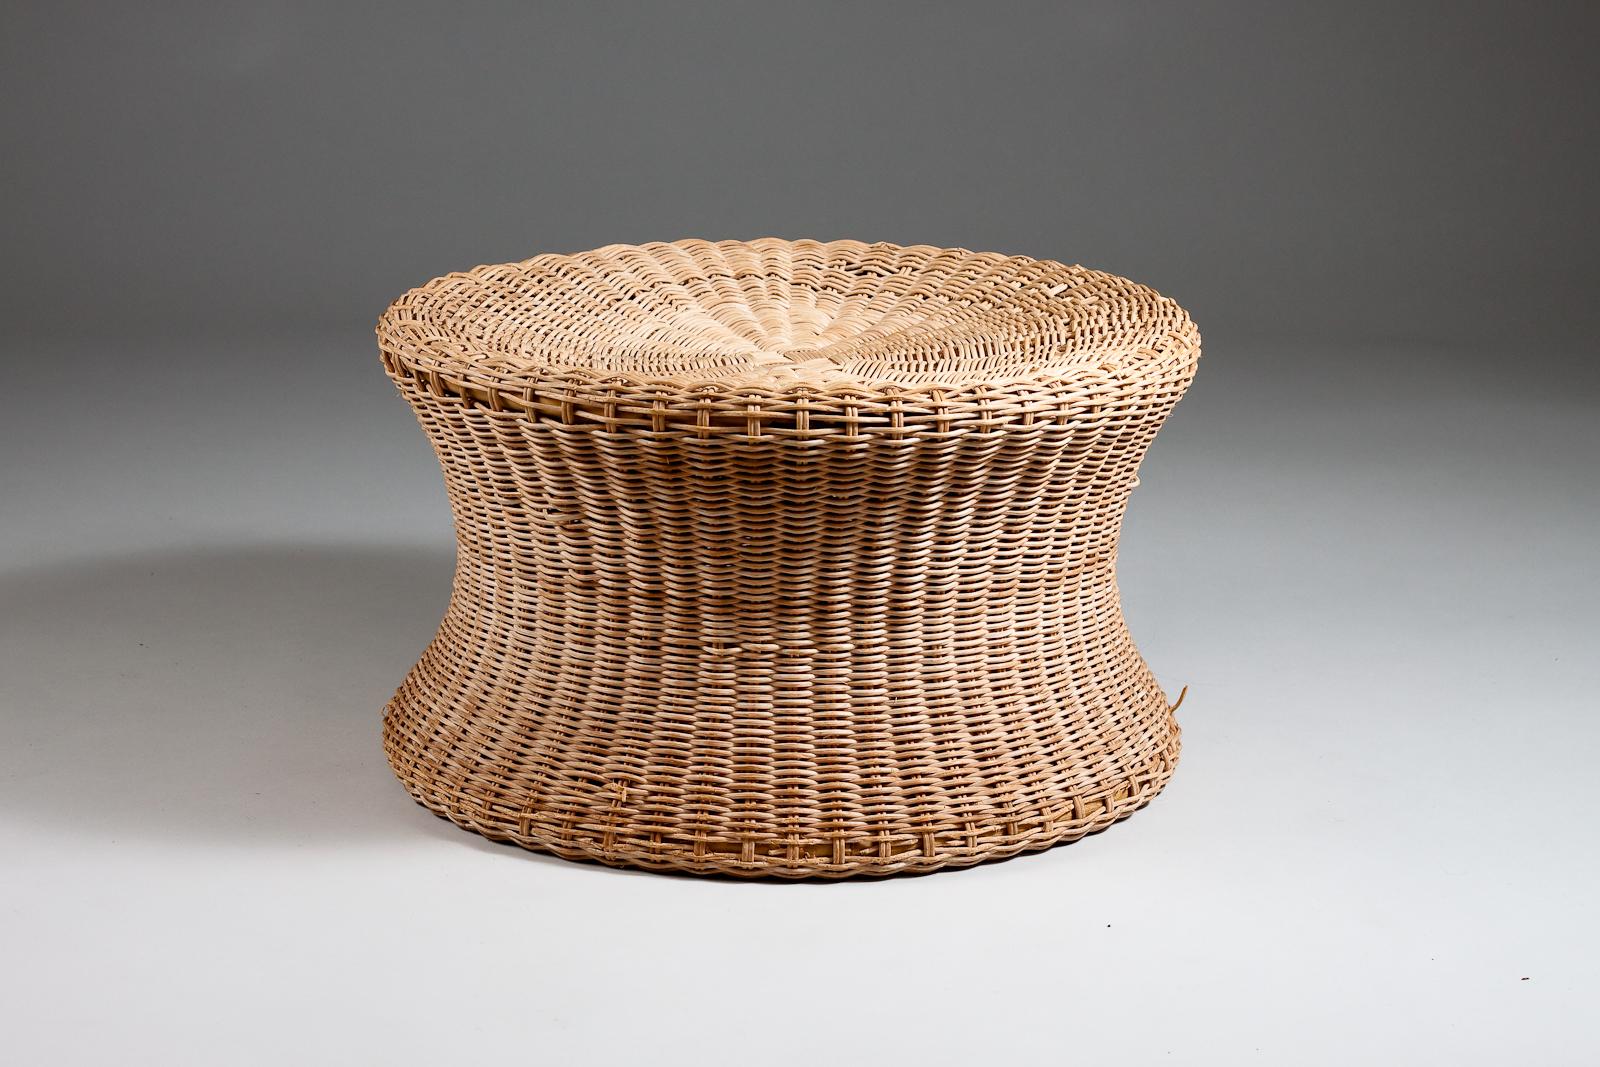 Introducing the iconic Eero Aarnio wicker Juttu stool, originally designed in the 1960's and offered by Artek. This vintage design piece features a unique and playful form that perfectly encapsulates the spirit of the mid-century modern era. The use